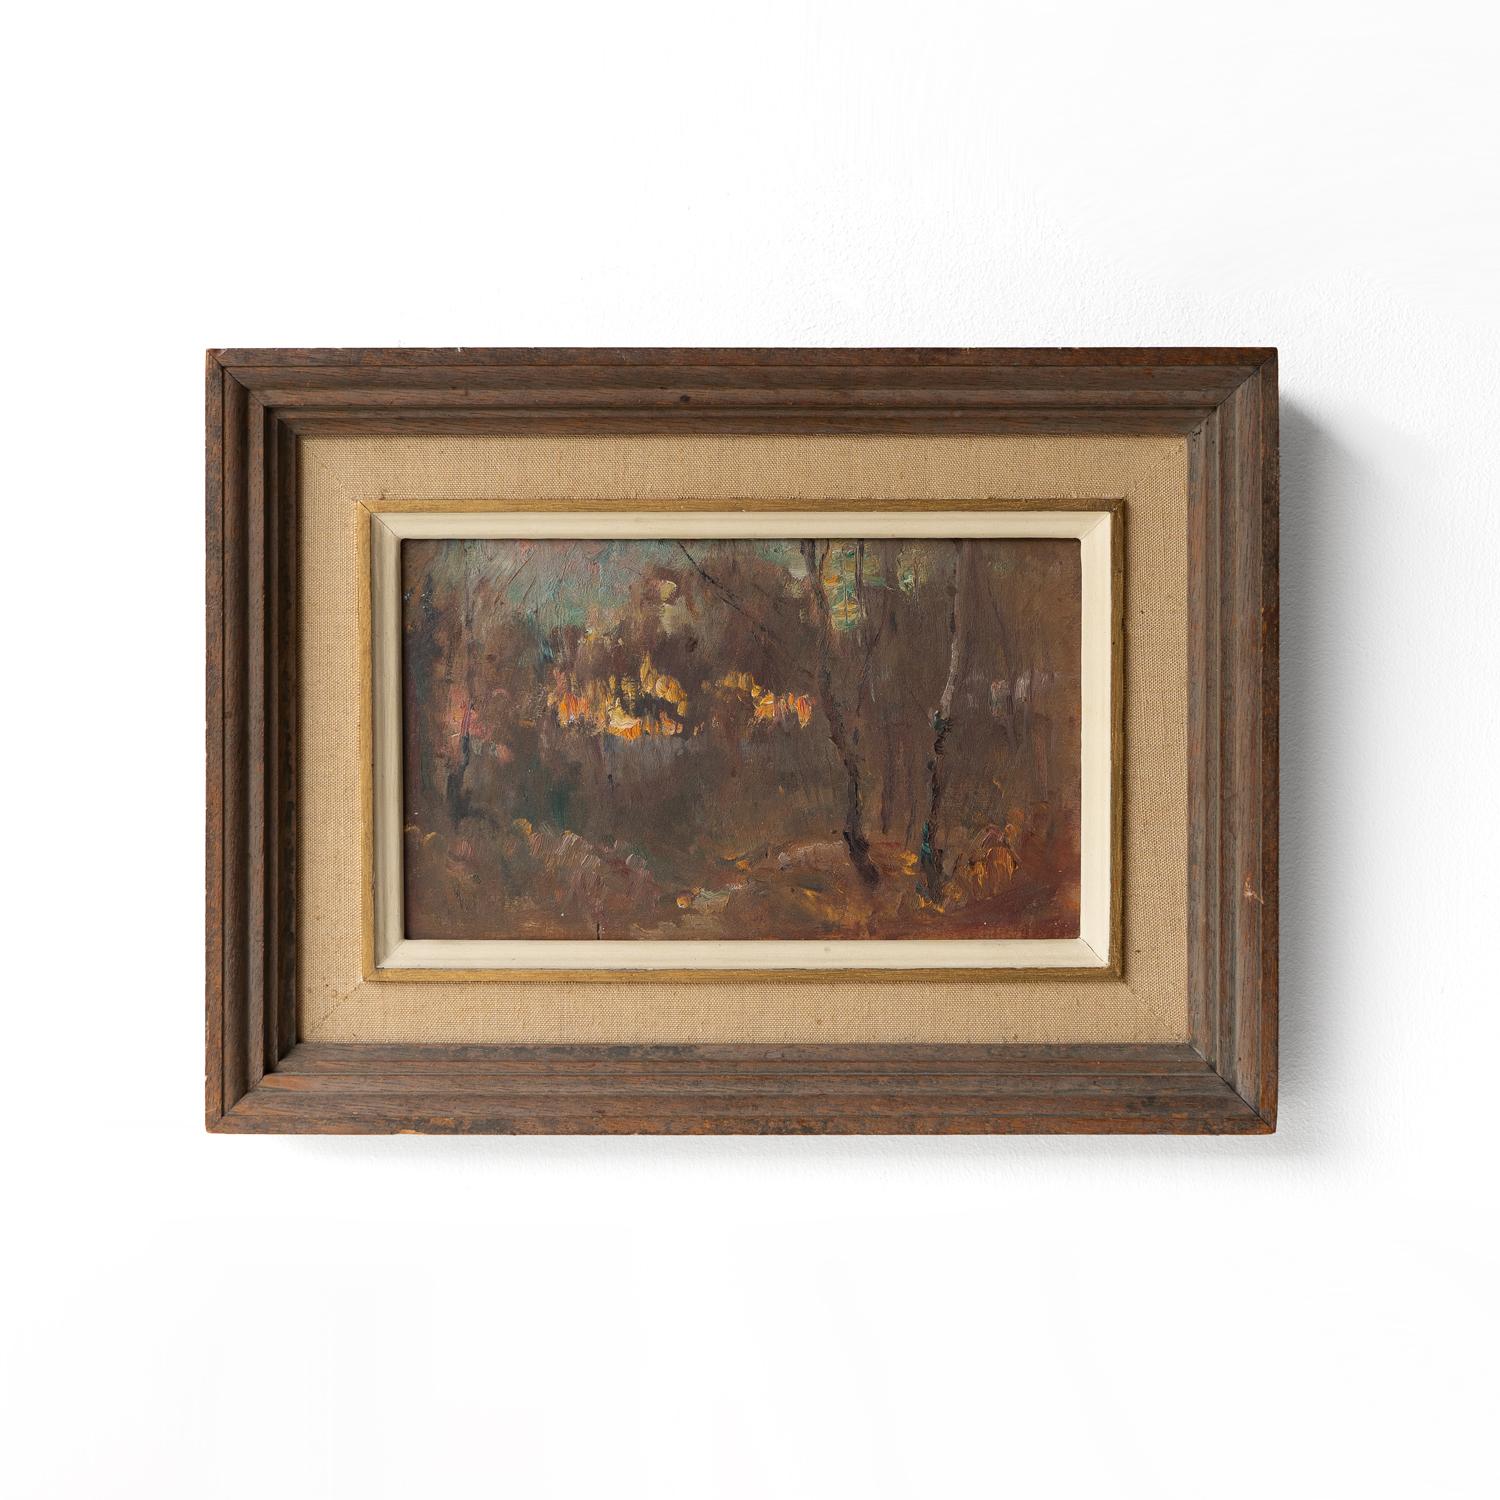 ANTIQUE ORIGINAL OIL BY JAMES HERBERT SNELL (1861–1935)
Depicting a fire viewed through trees in a blue-skied wintery landscape.

Painted in a free and confident impressionist style typical of Snell’s later work.

Signed ‘J. Herbert Snell’ on the